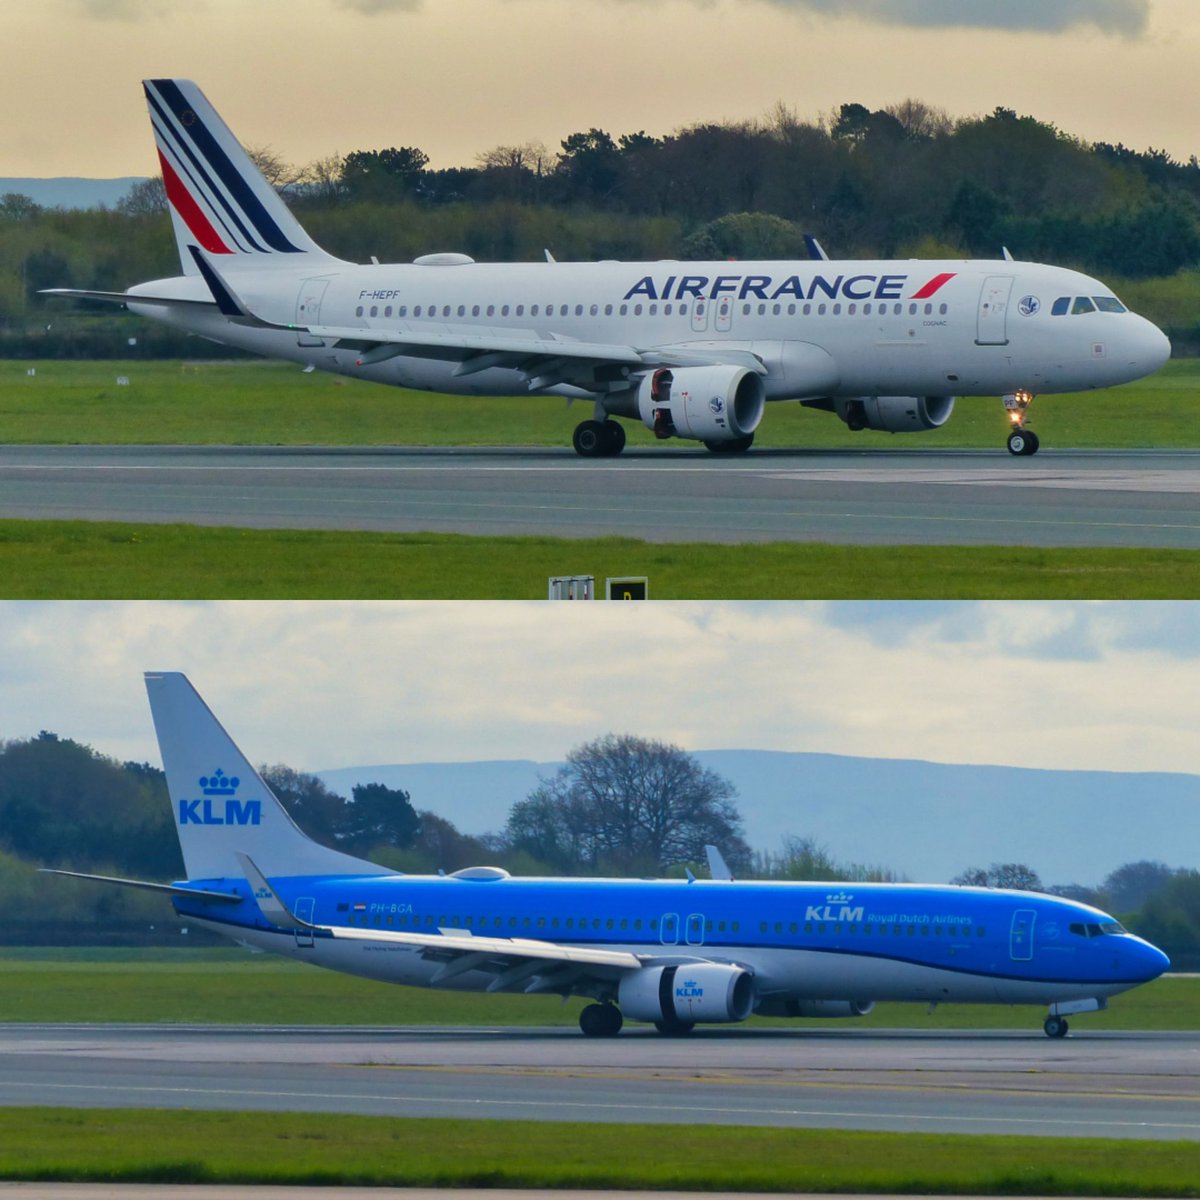 20 years ago today Air France–KLM Group was formed Seen here is Air France Airbus A320-200 F-HEPF and KLM Boeing 737-800 PH-BGA arriving at Manchester Airport 15.4.22. #airfranceklm #airfranceklmgroup #klm #klmairlines #klmroyaldutchairlines #royaldutchairlines #airfrance